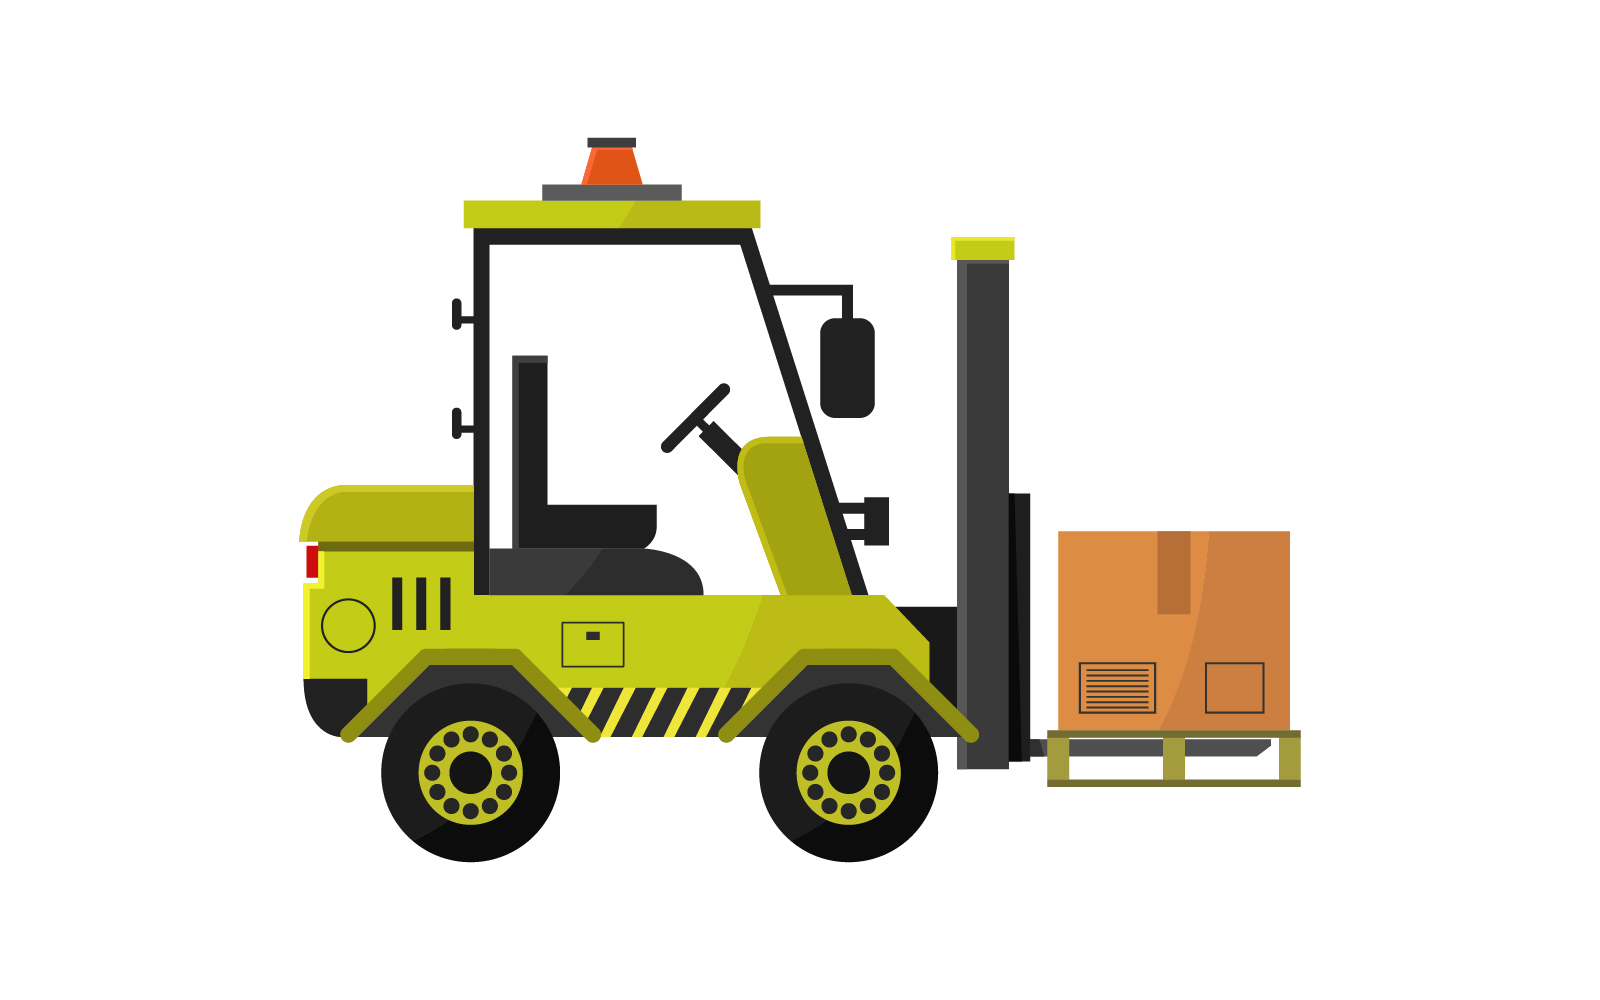 Forklift illustrated in vector on background